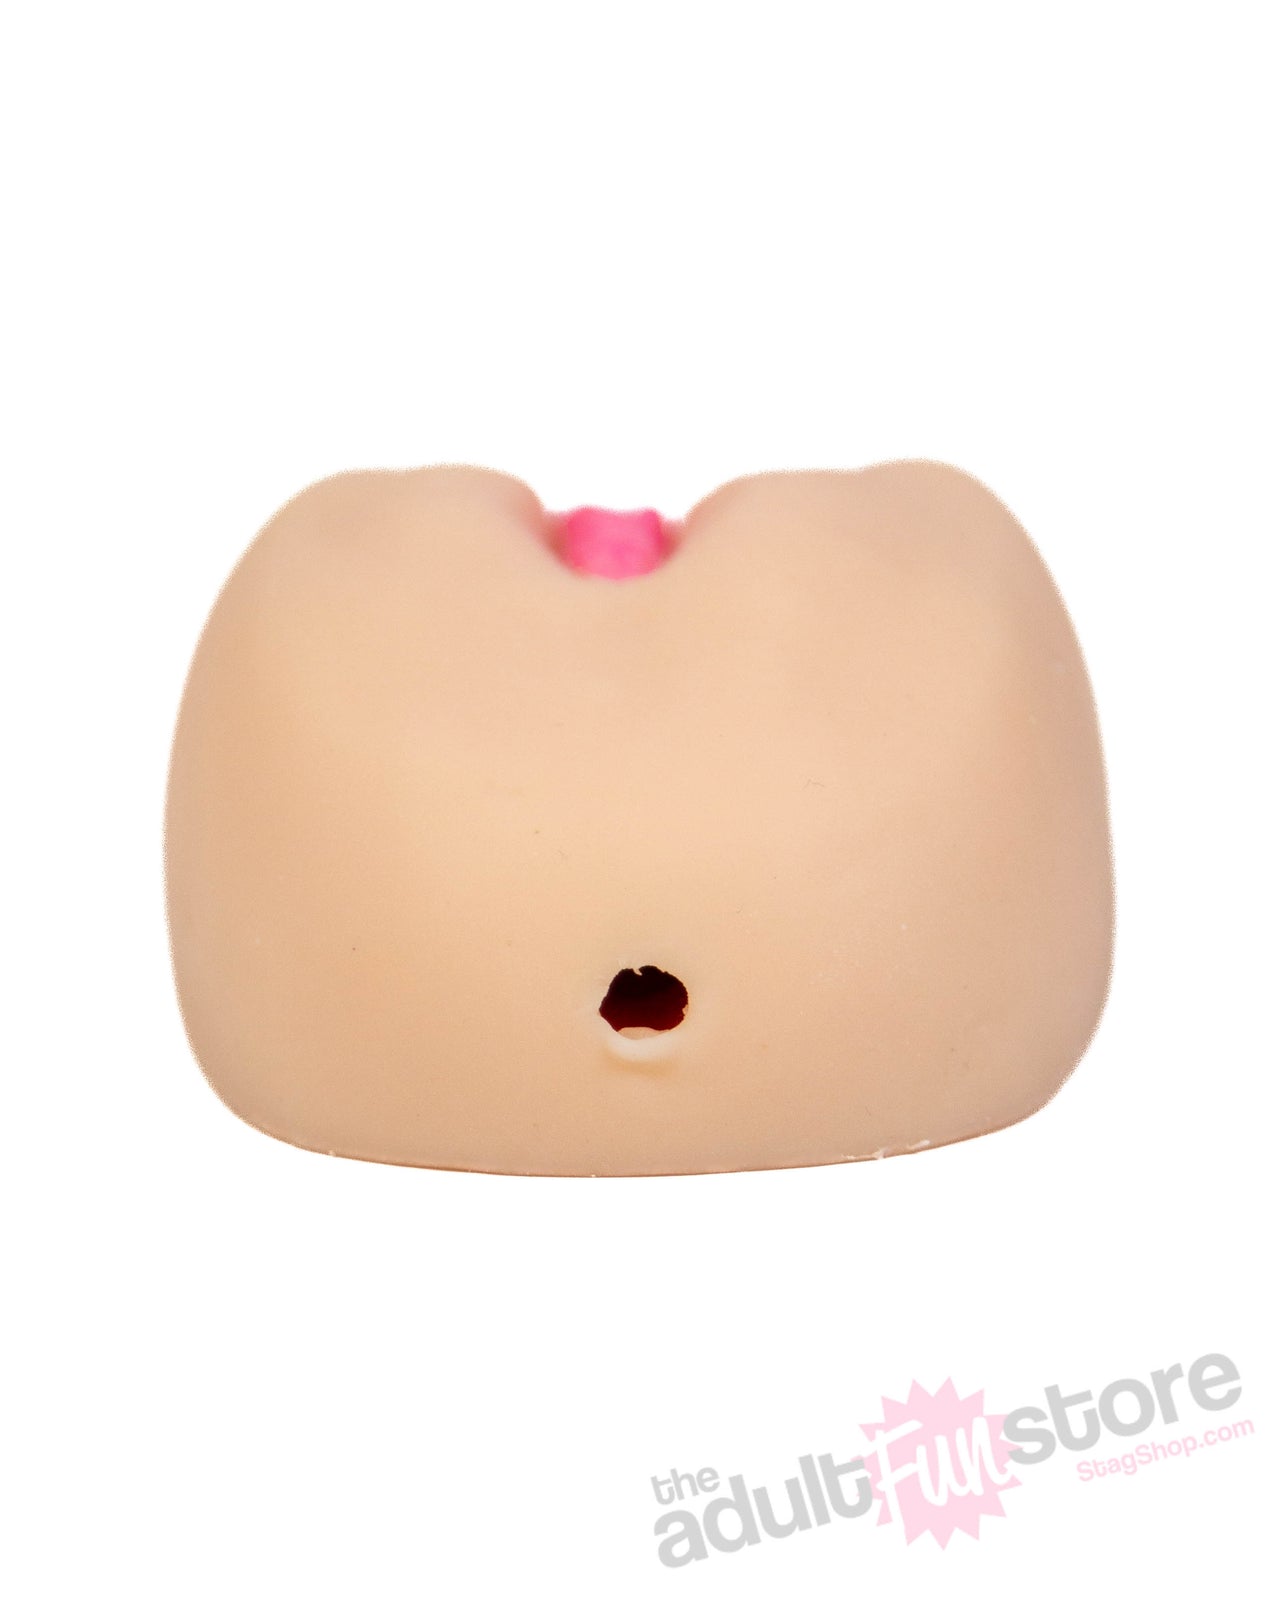 HUSTLER Toys - Vibrating Pussy & Ass - 2 Tight Holes Stroker - Beige - Stag Shop